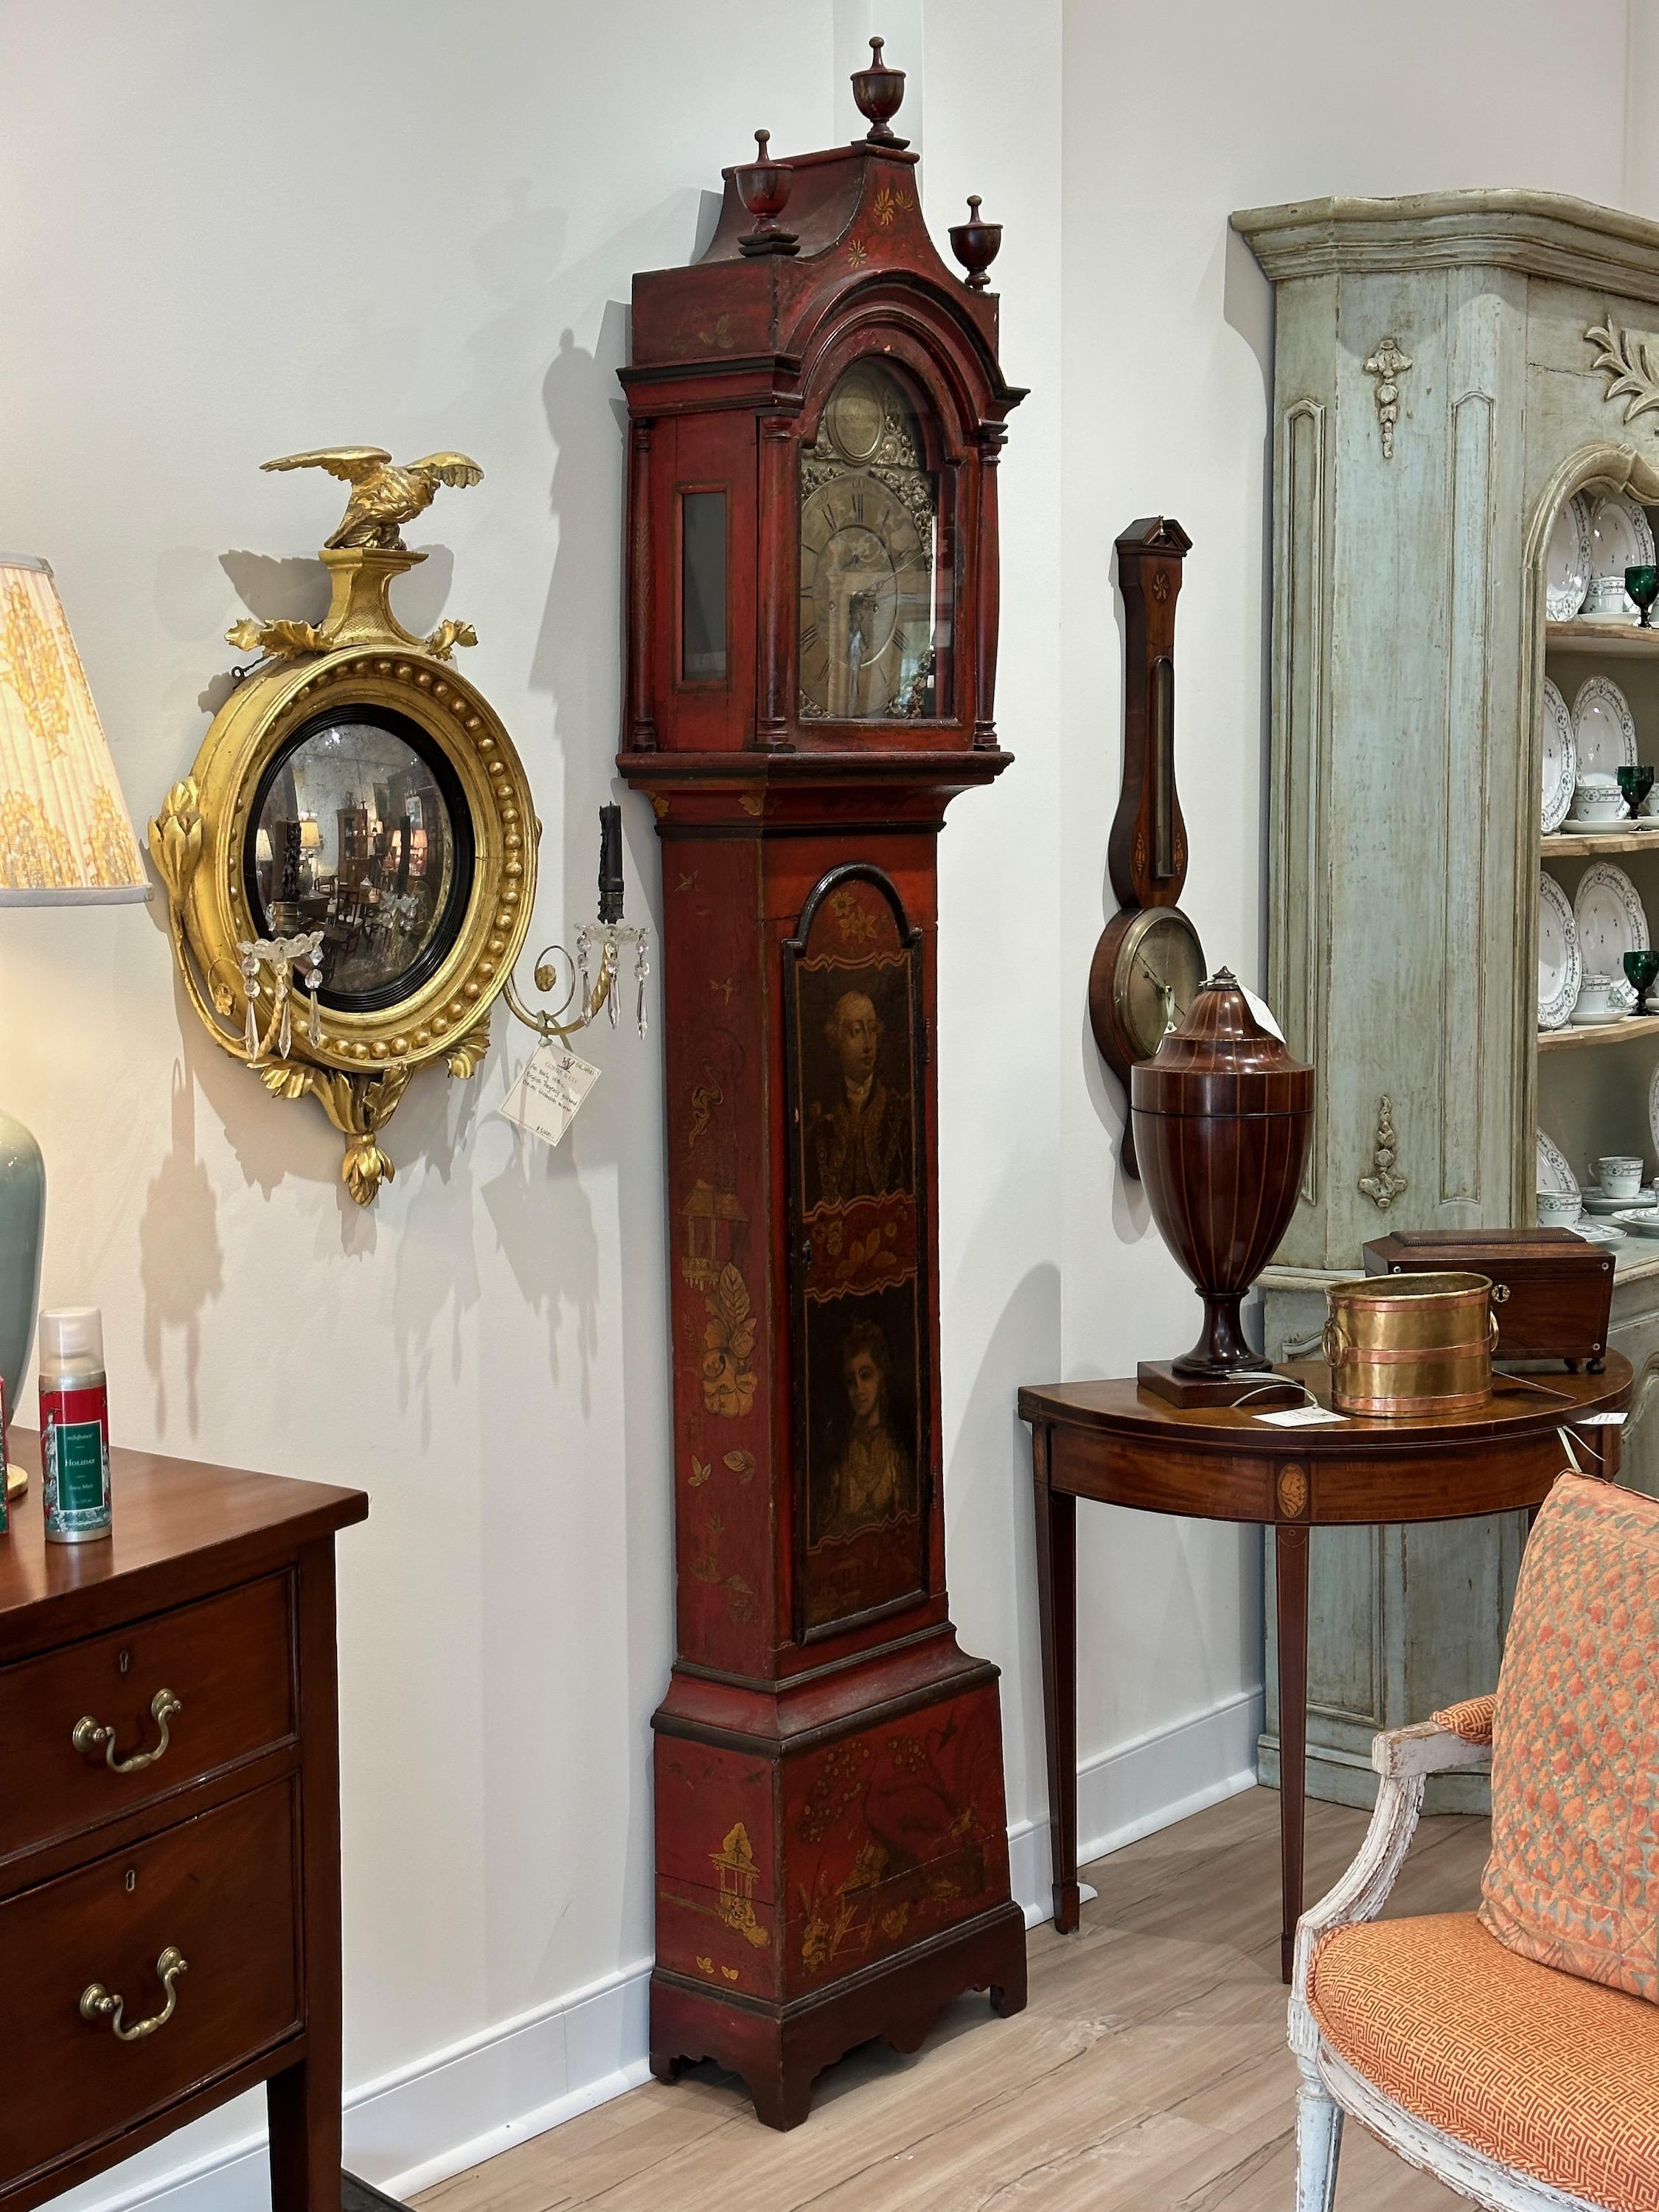 A lovely and unusual late 18th century. English elegantly proportioned tall case clock in scarlet chinoiserie with an elaborately engraved brass dial signed 